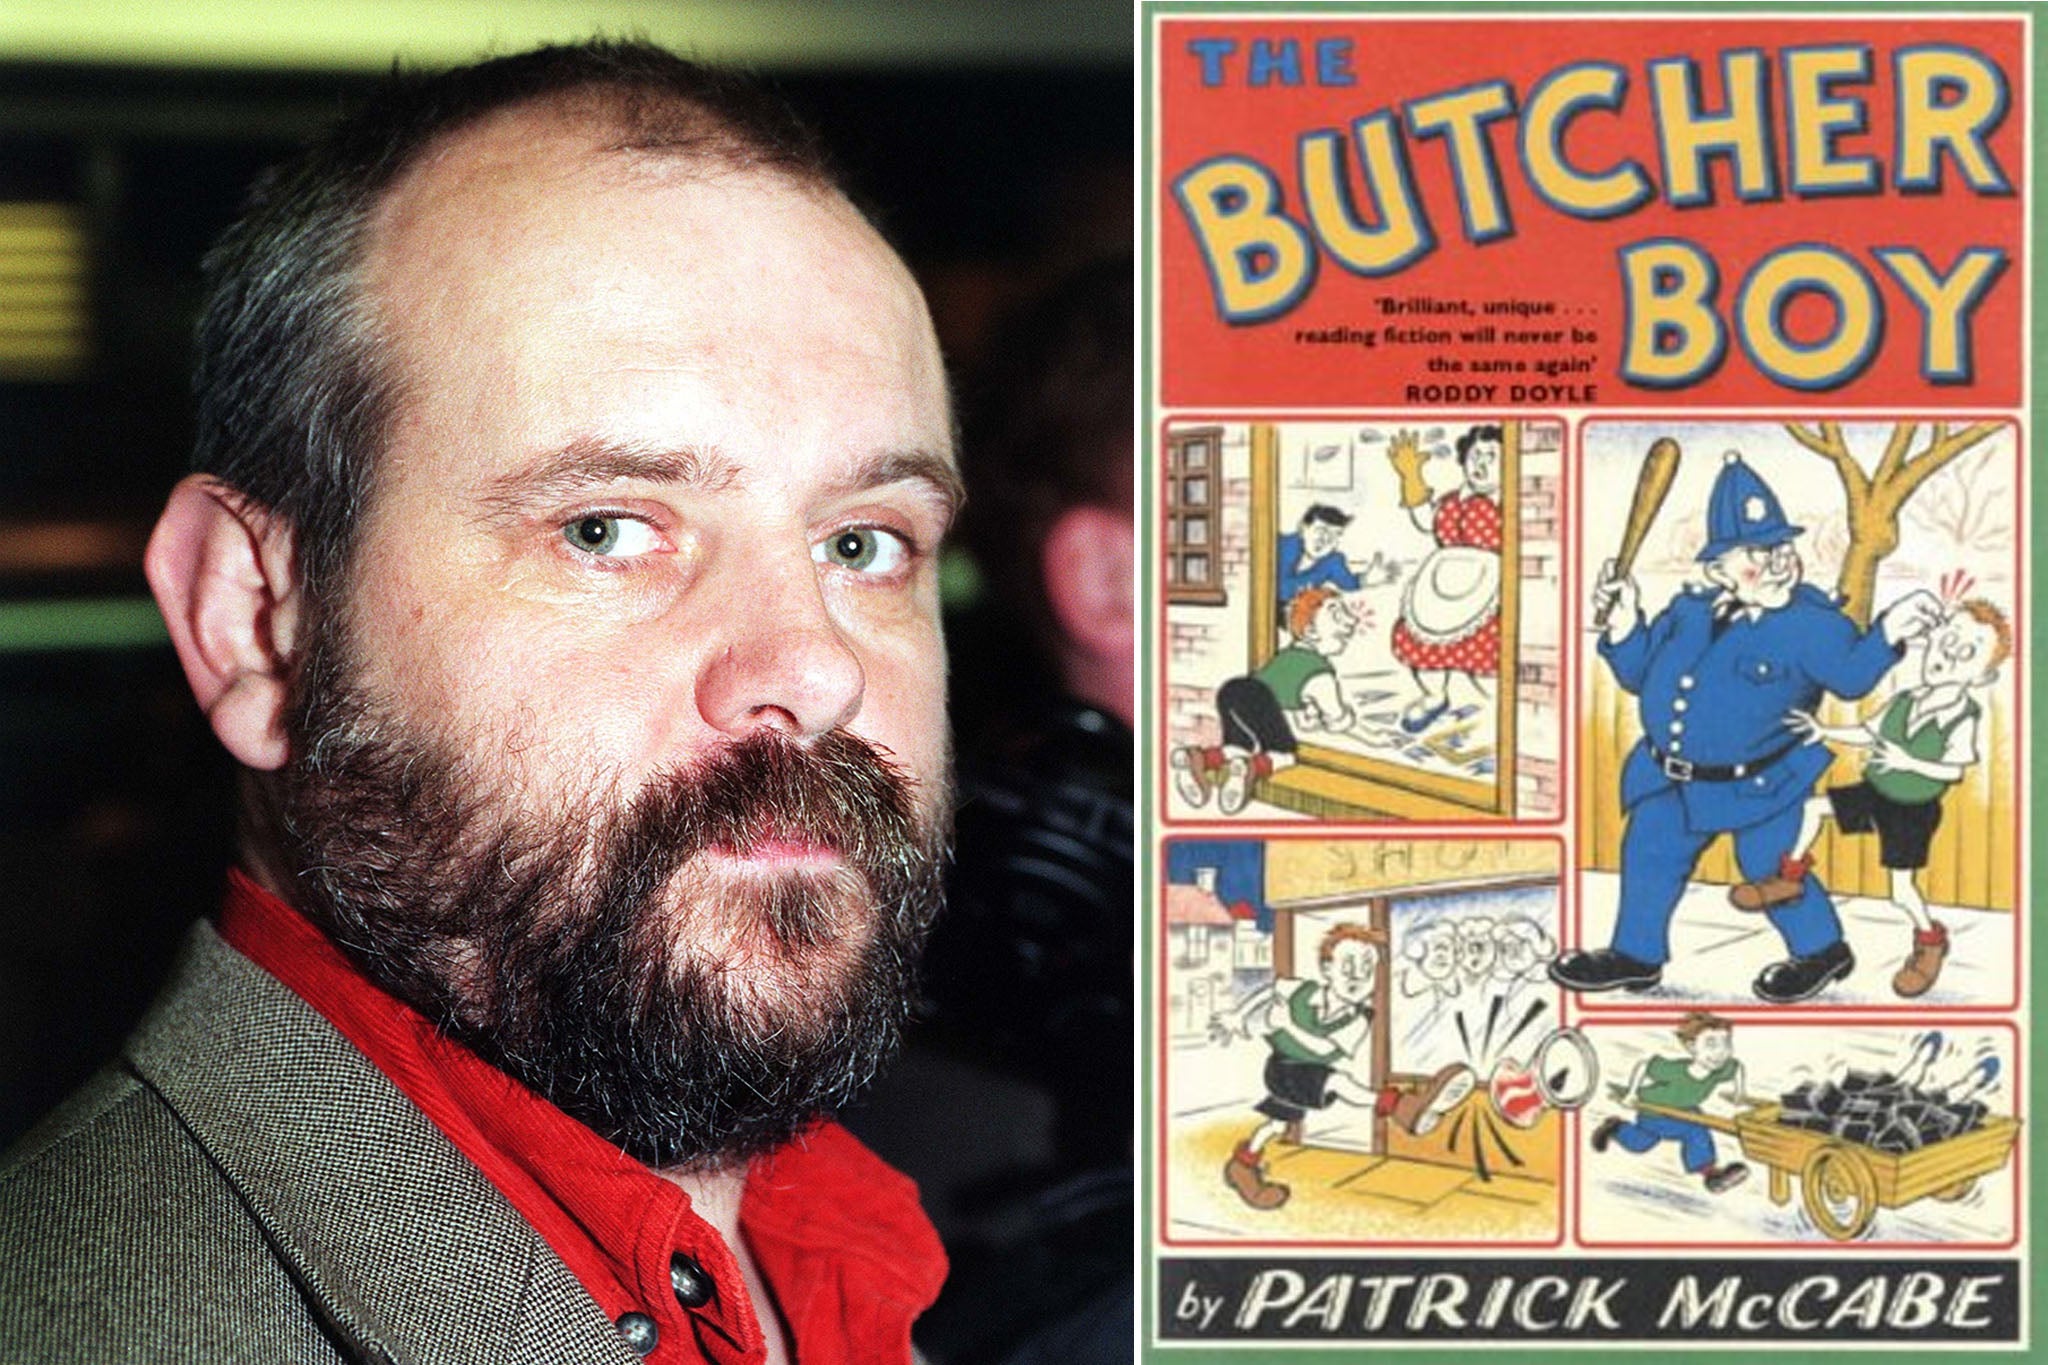 Patrick McCabe’s novel ‘The Butcher Boy’ won the 1992 Irish Literature Prize for Fiction and was also shortlisted for the Booker Prize